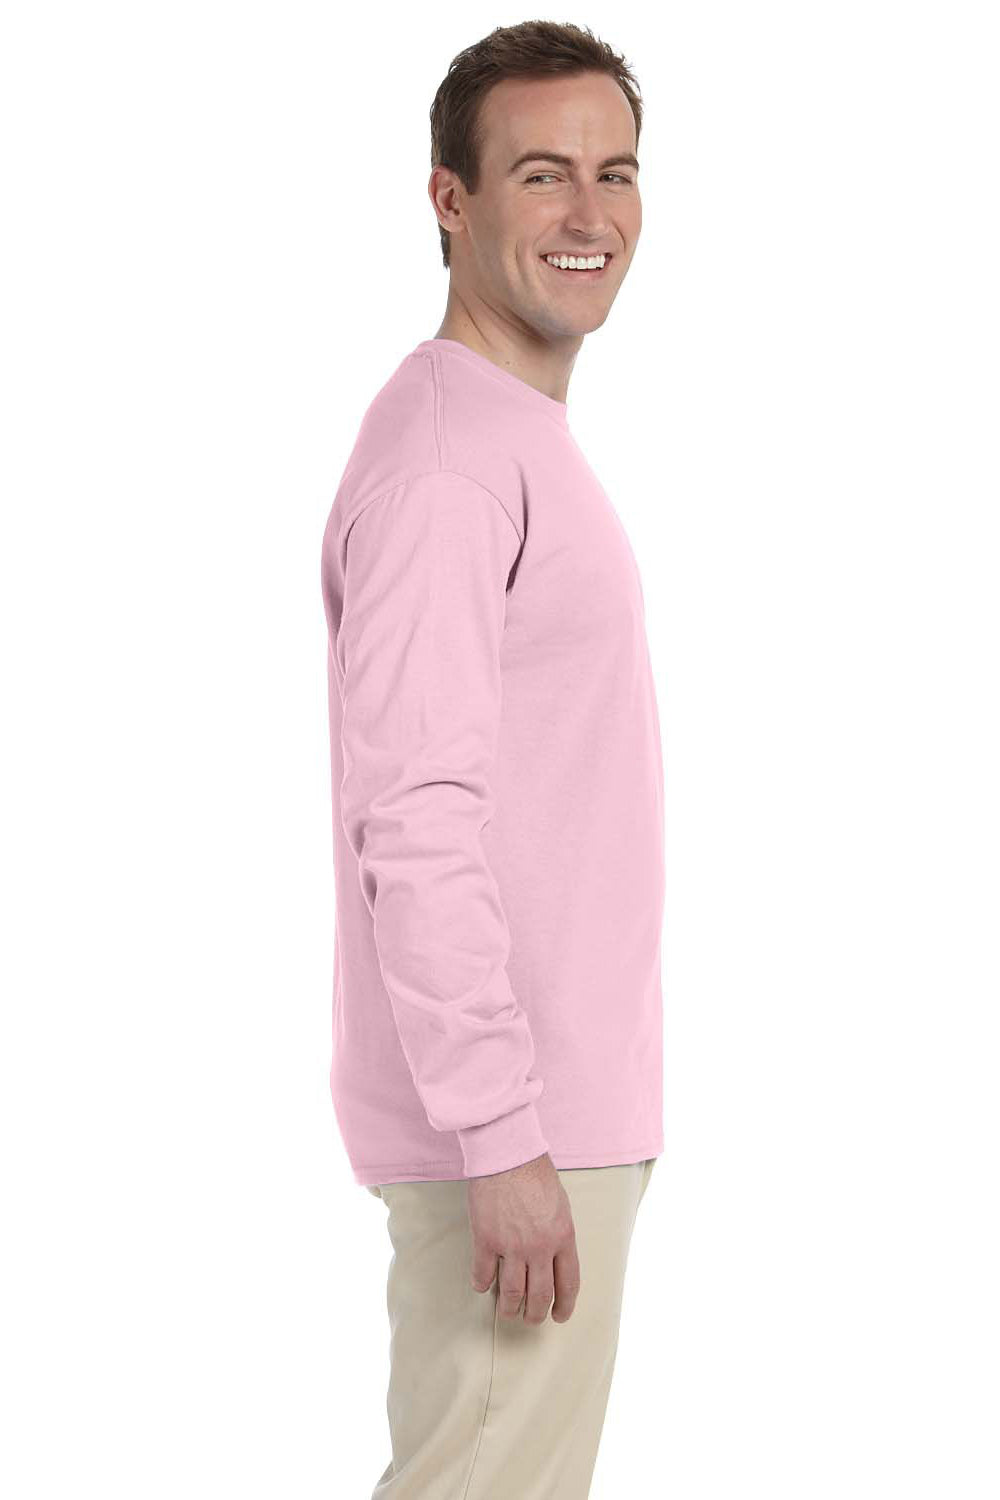 Fruit Of The Loom 4930 Mens HD Jersey Long Sleeve Crewneck T-Shirt Classic Pink Side